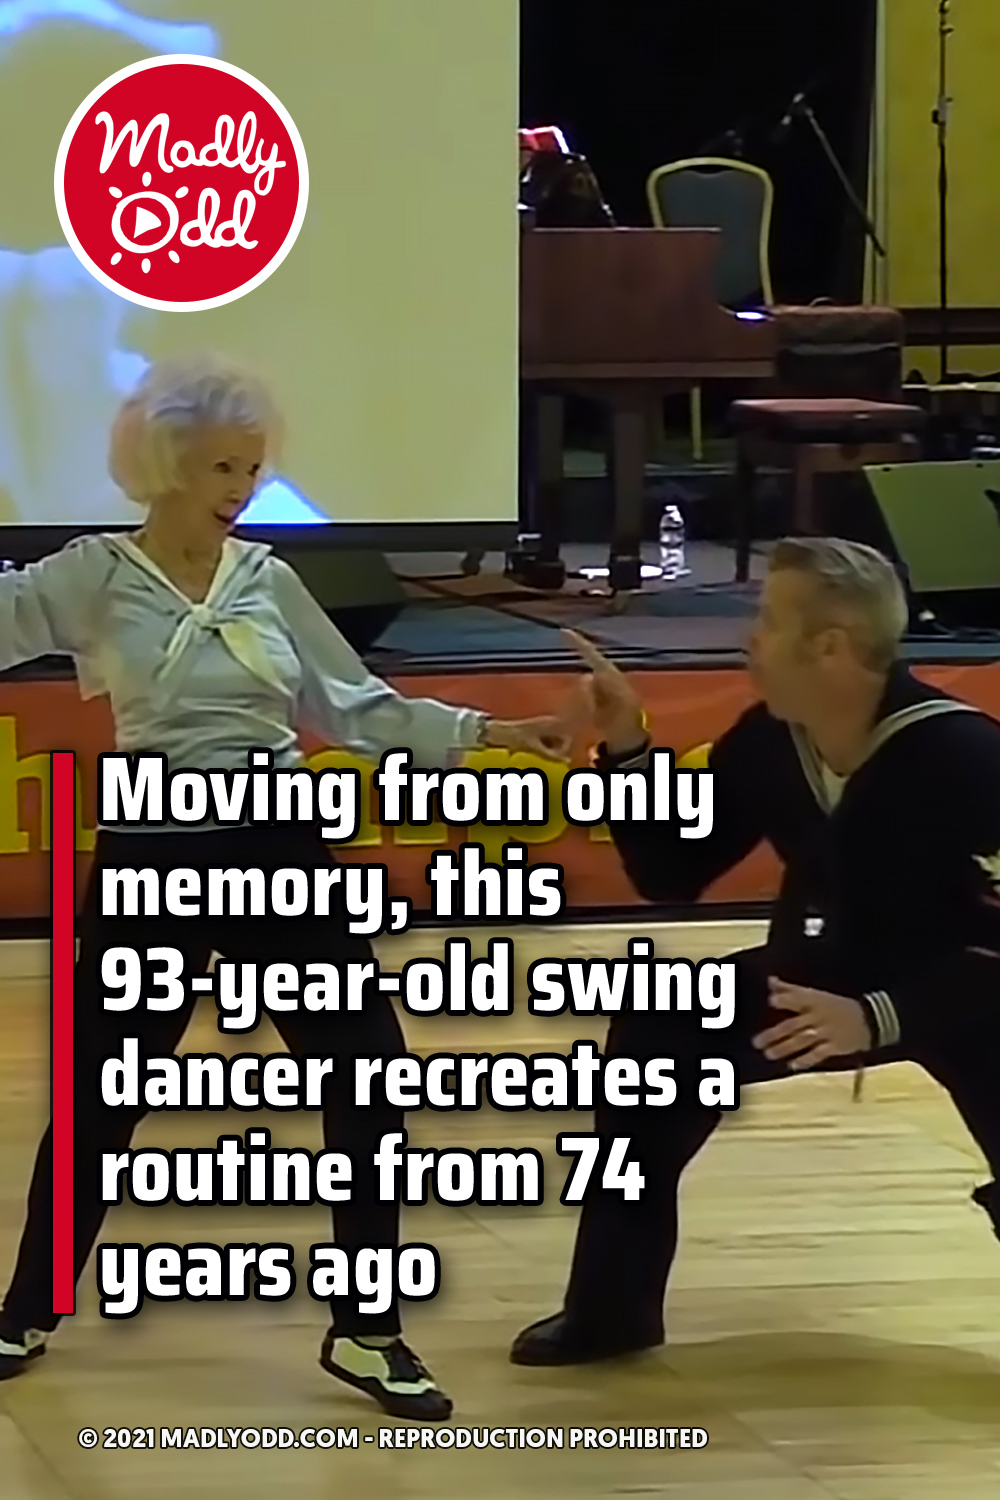 Moving from only memory, this 93-year-old swing dancer recreates a routine from 74 years ago